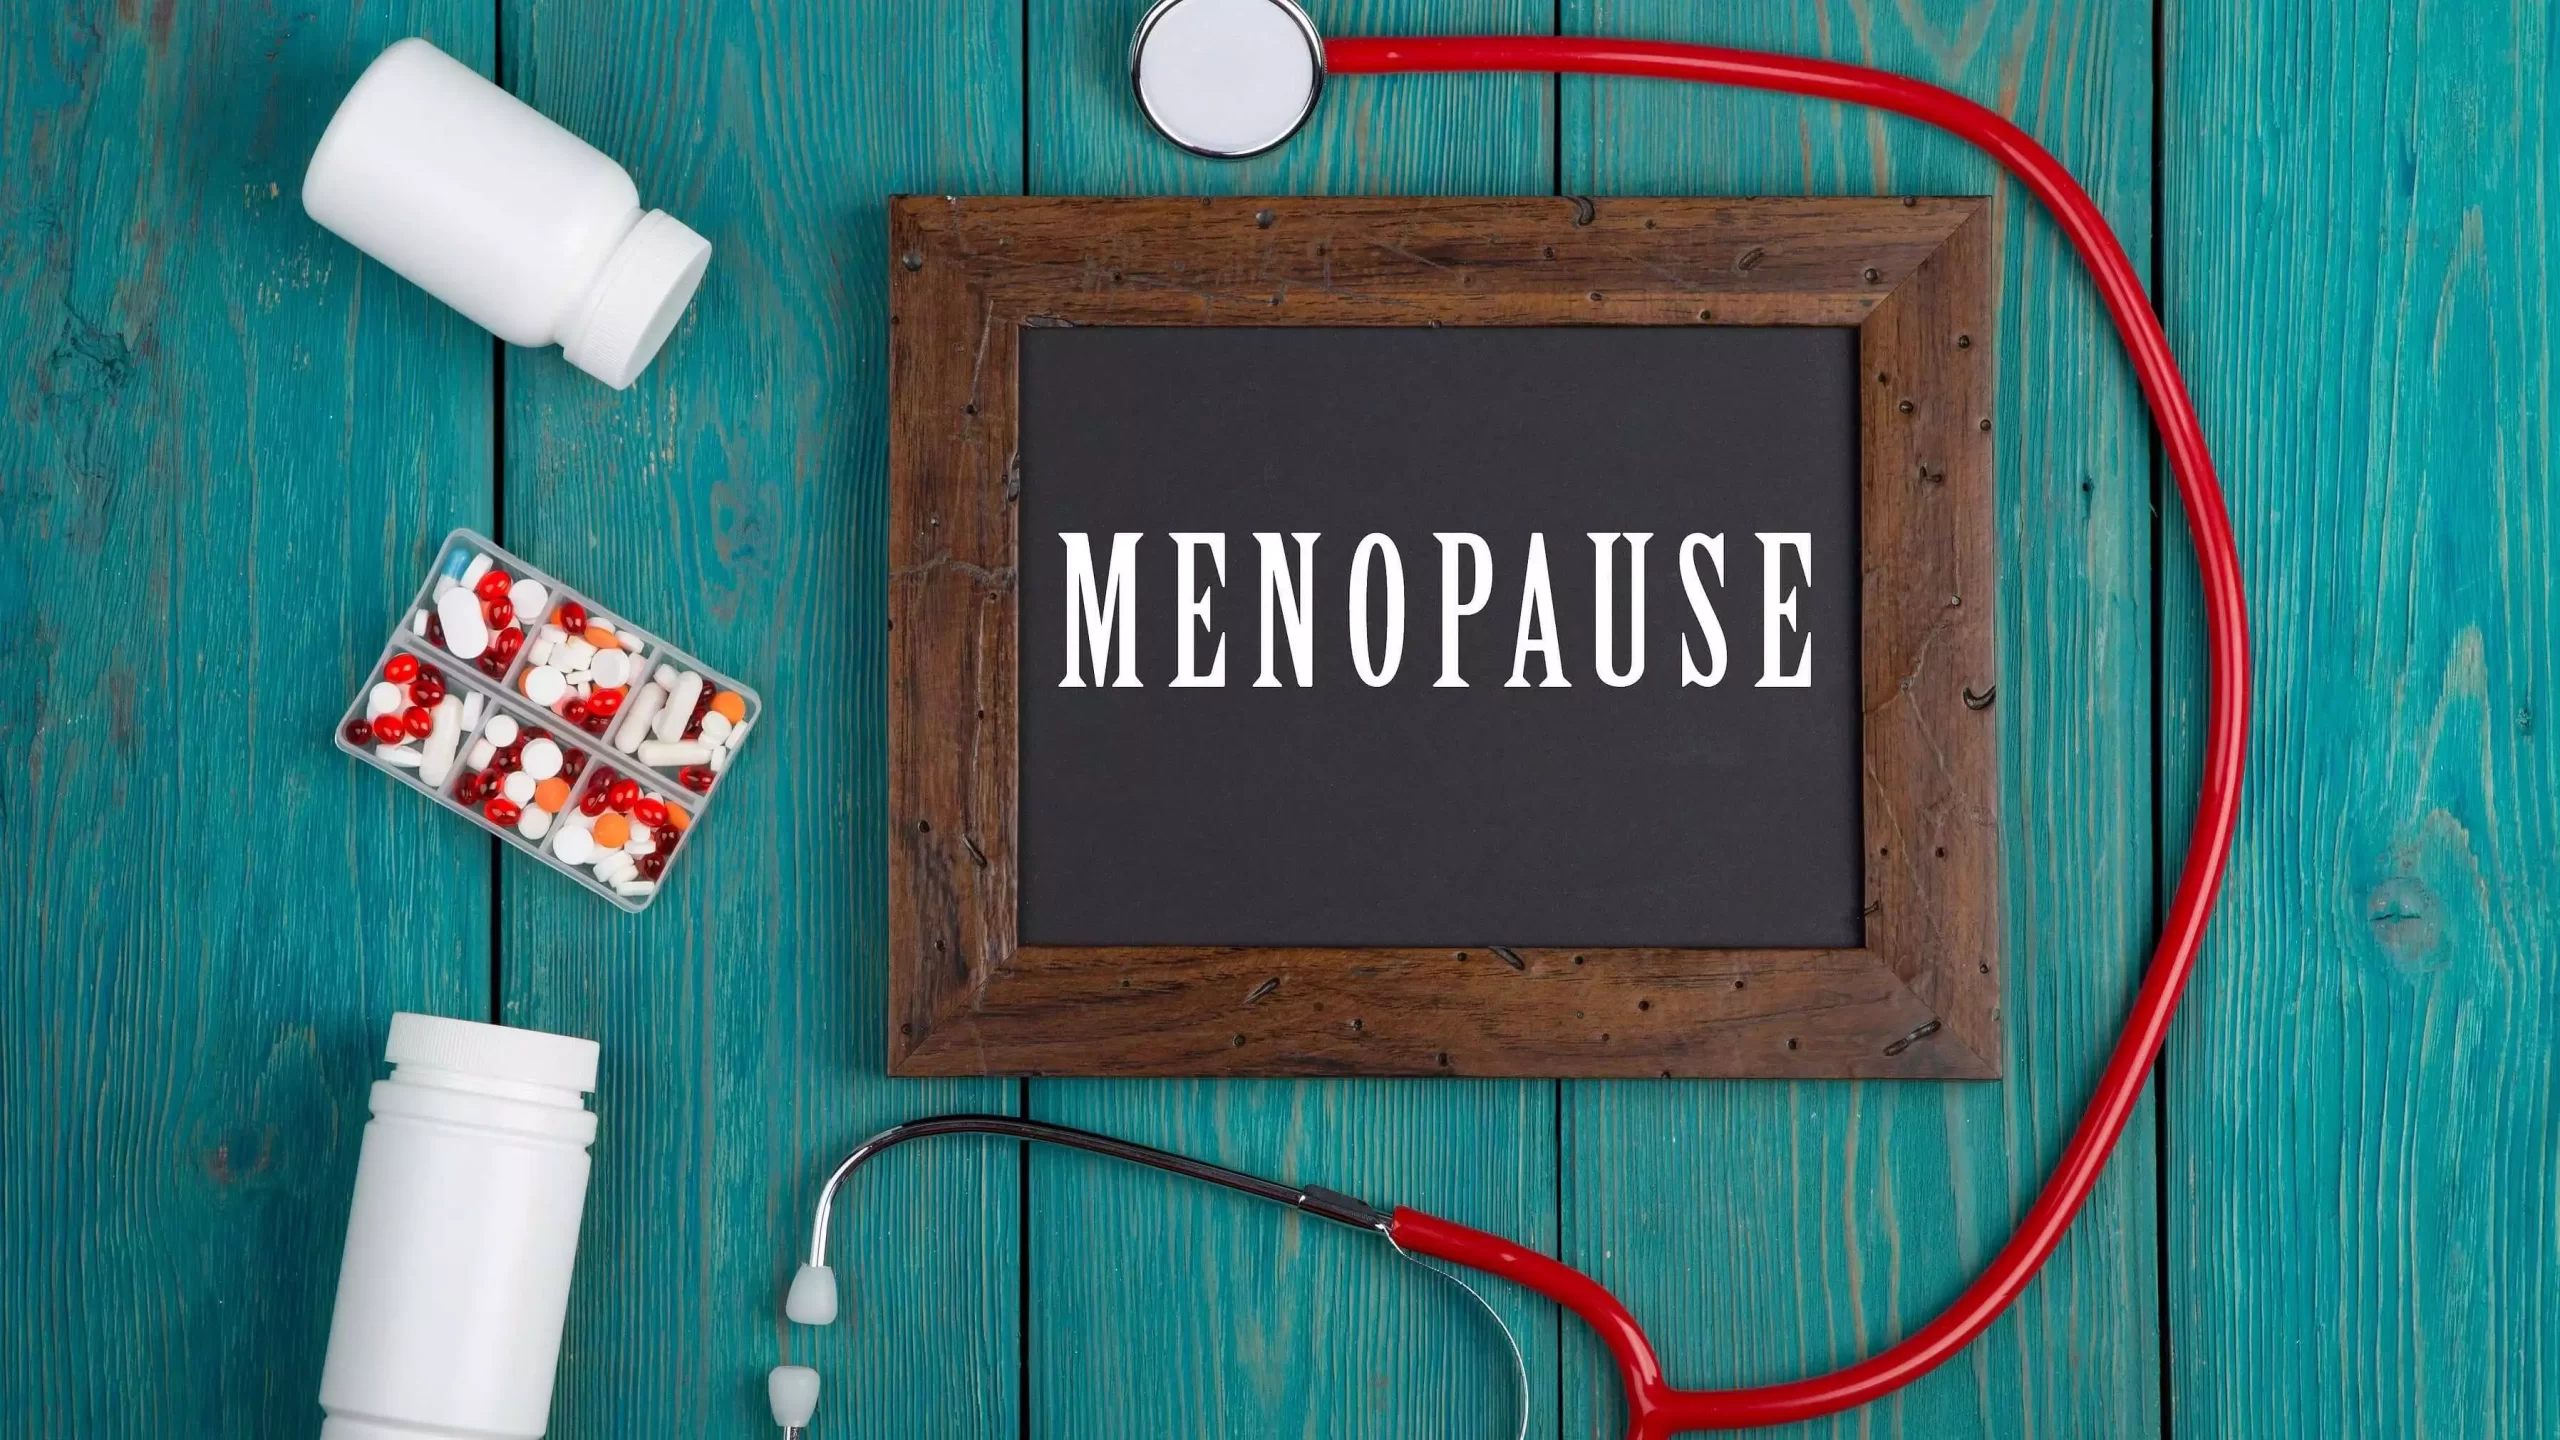 7 Ways To Deal With Menopause